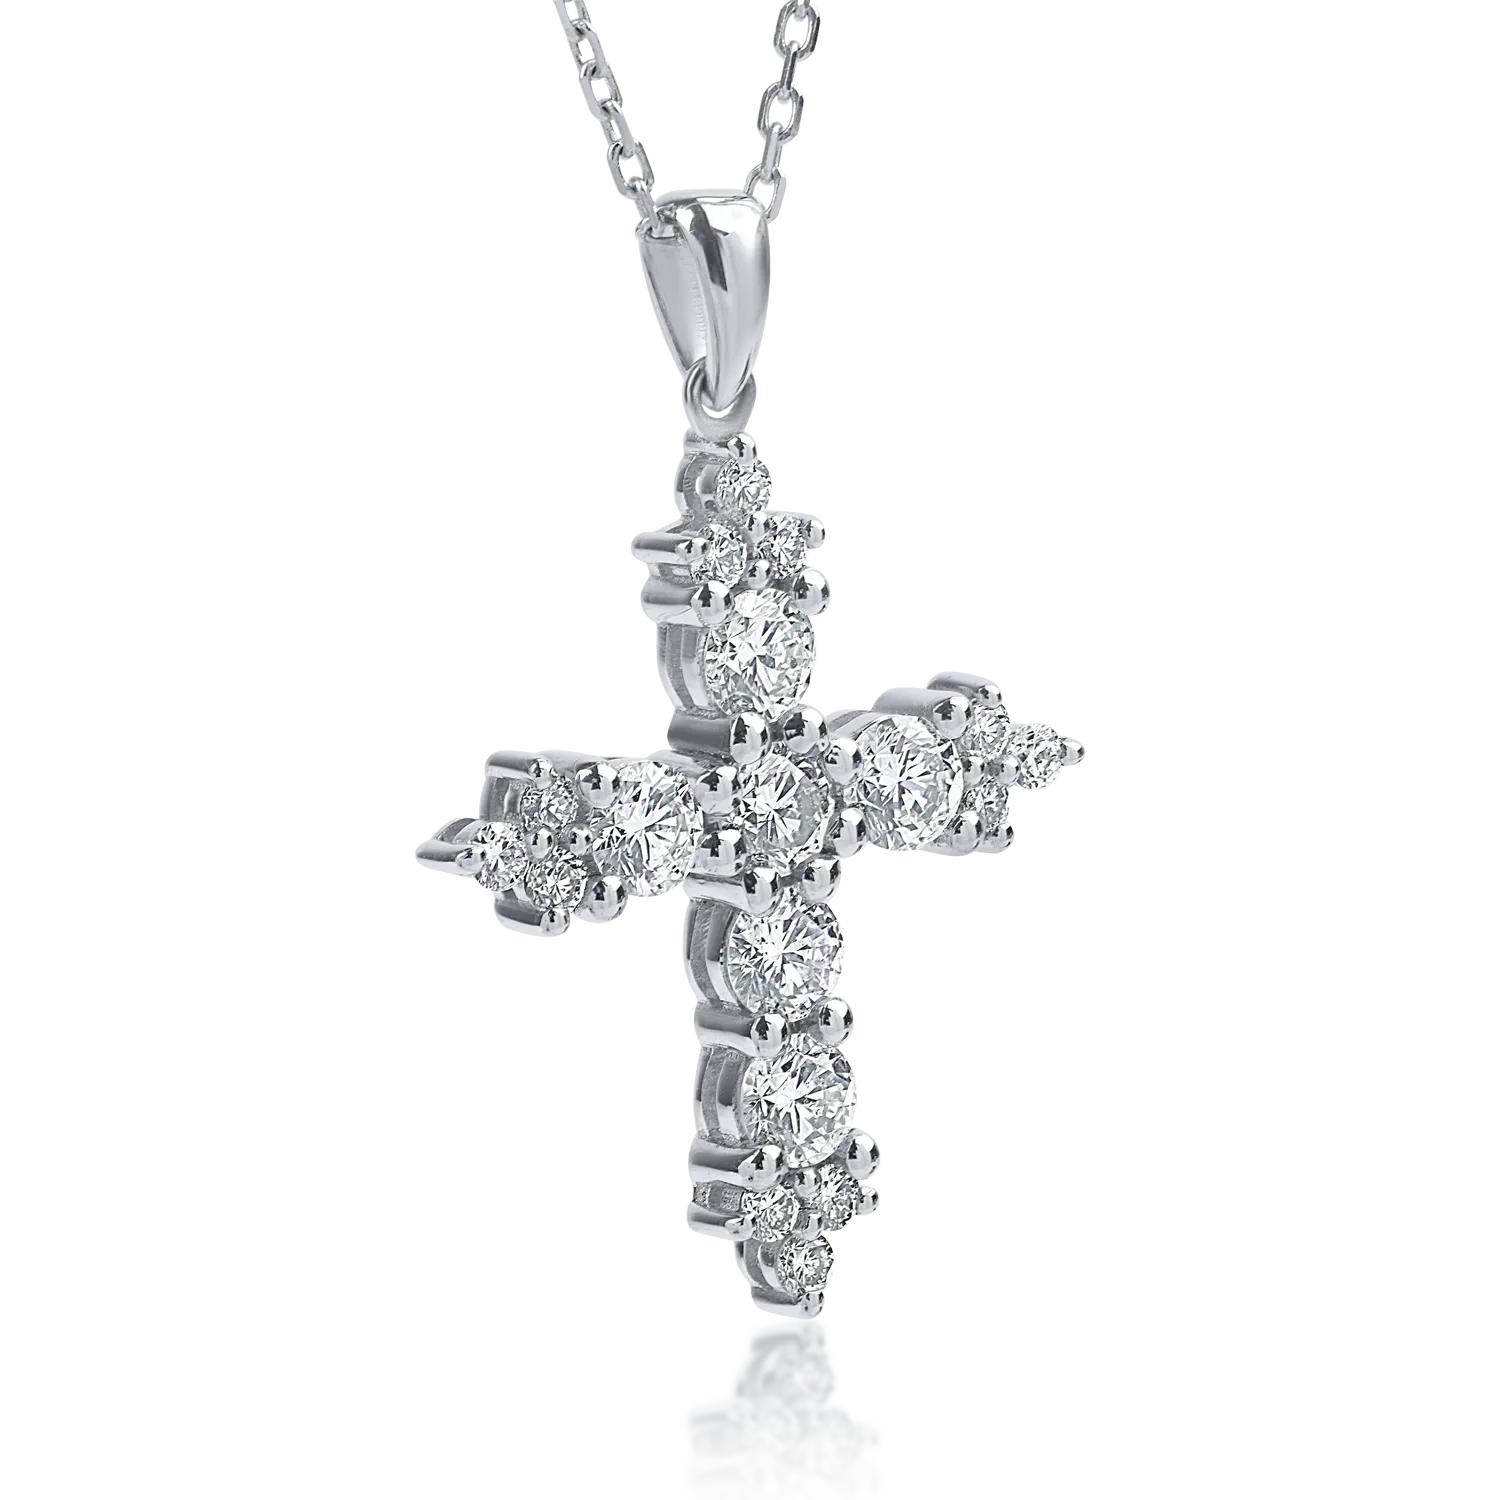 White gold cross pendant necklace with 0.7ct diamonds